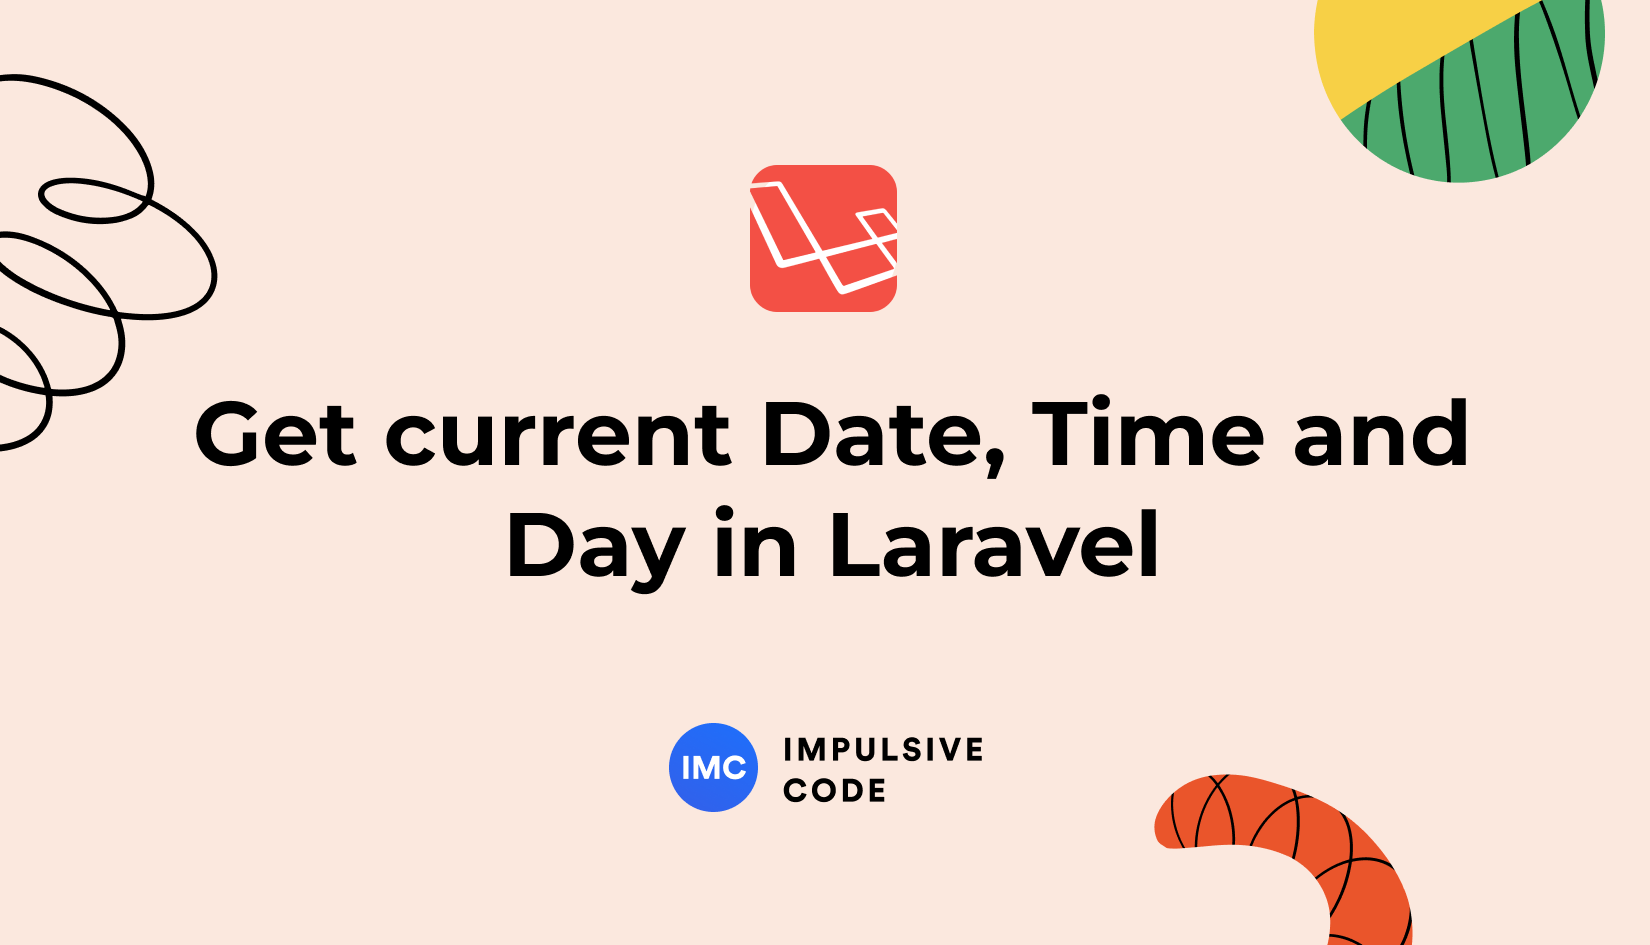 Get current Date, Time and Day in Laravel